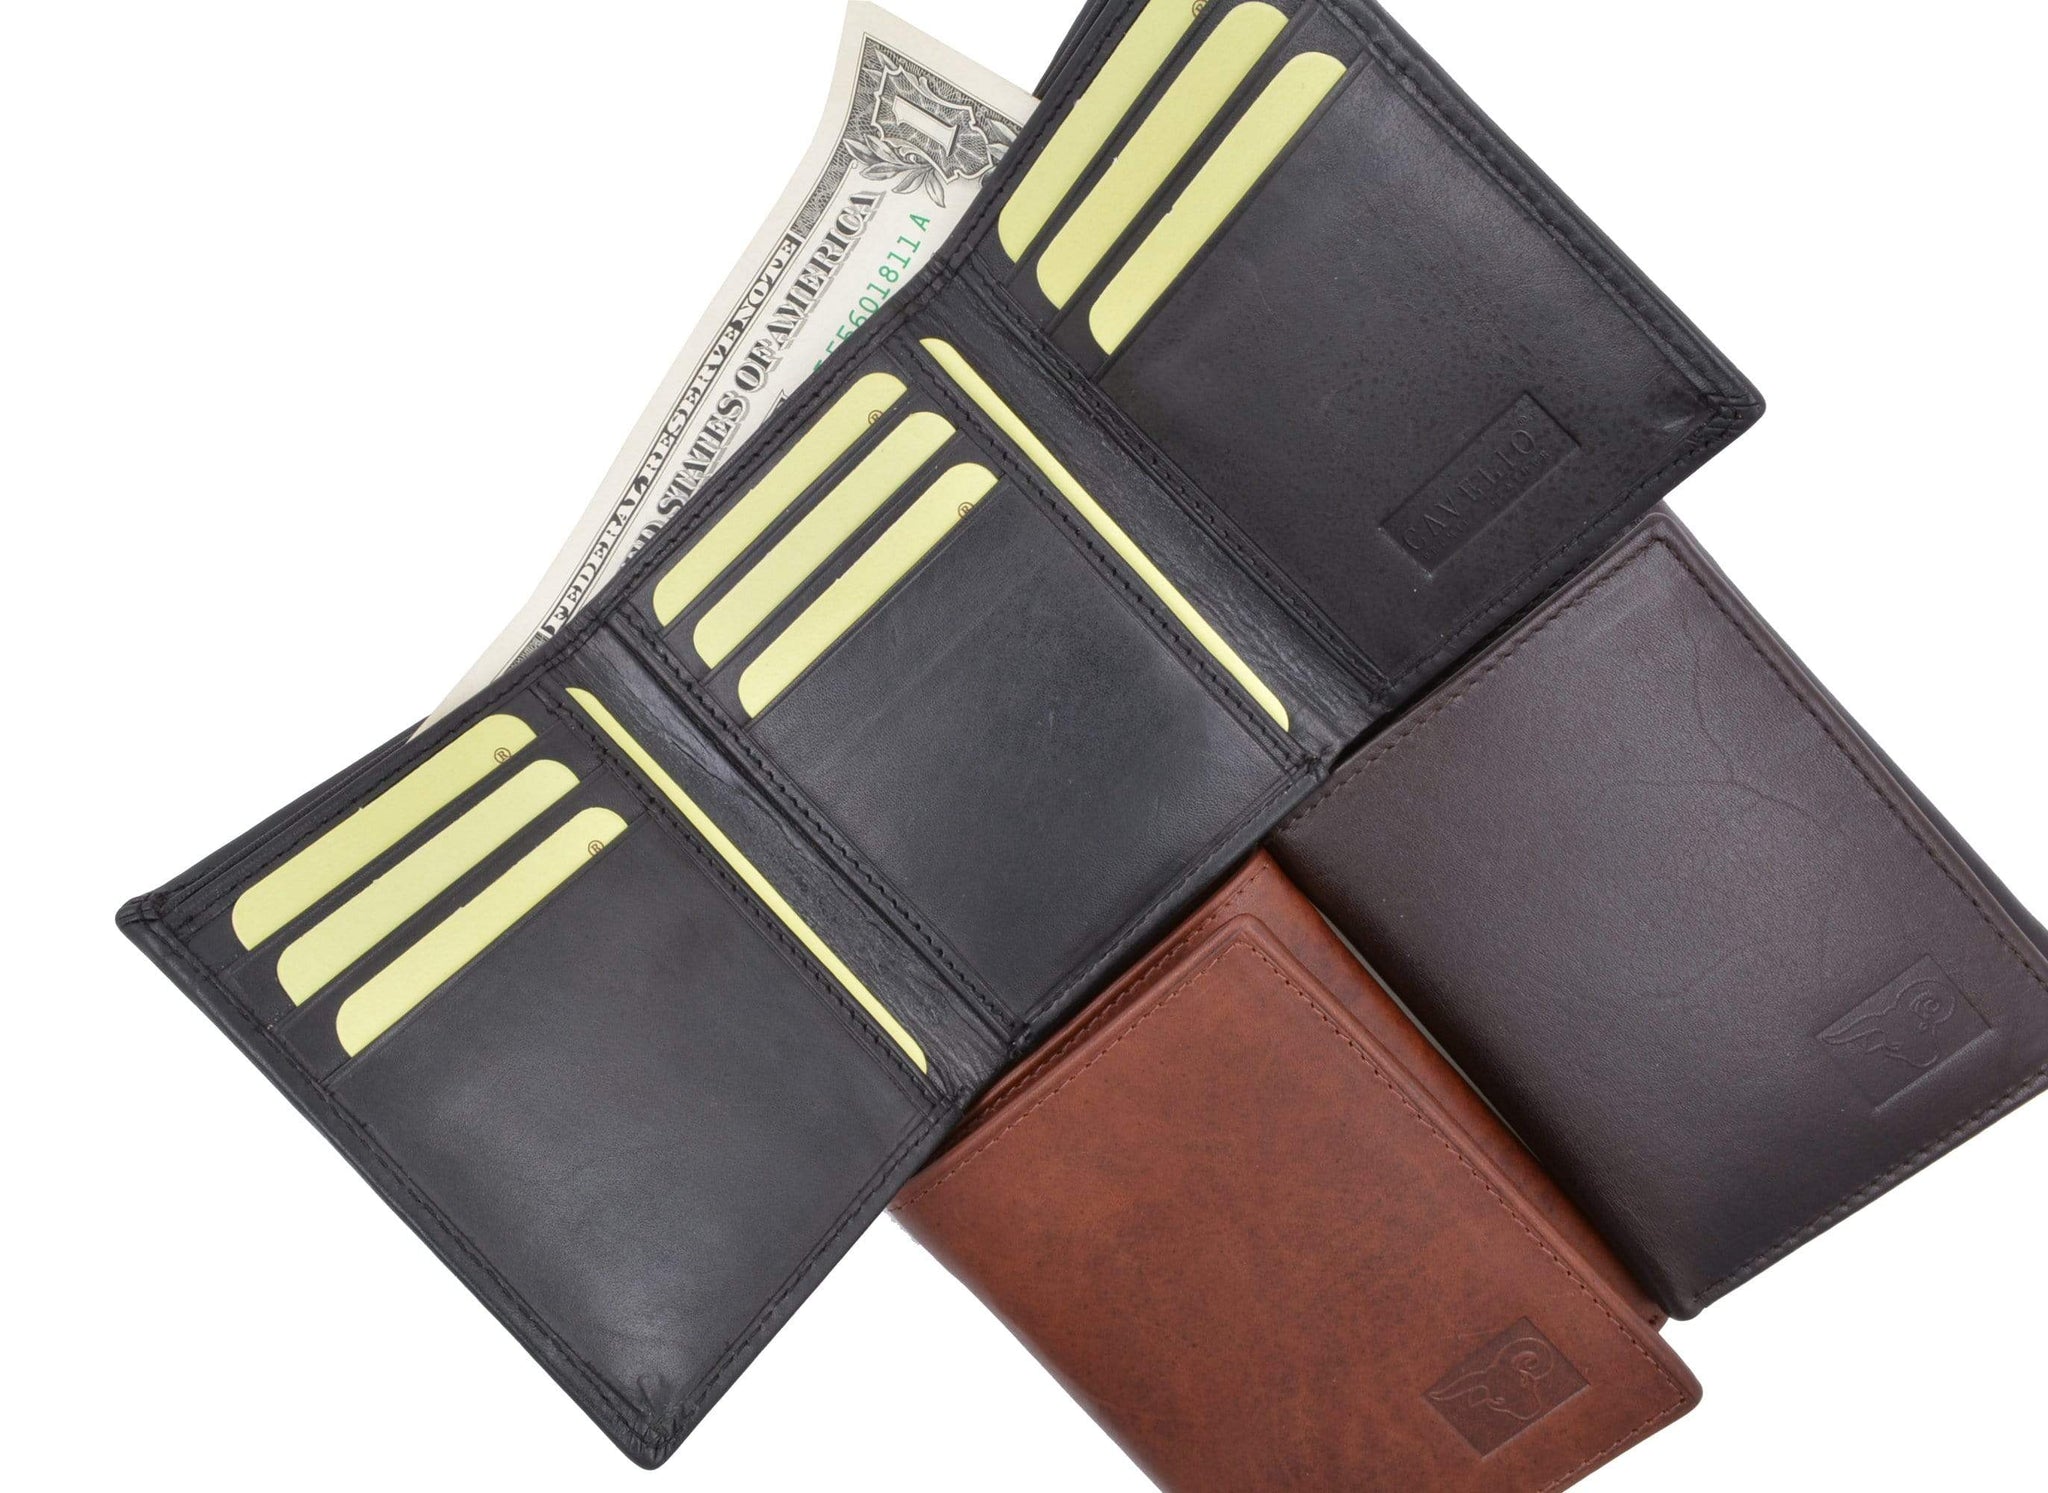 Bi Fold Genuine Leather Wallet for Men with Coin Pocket and ID Window Tan,  Card Slots: 8